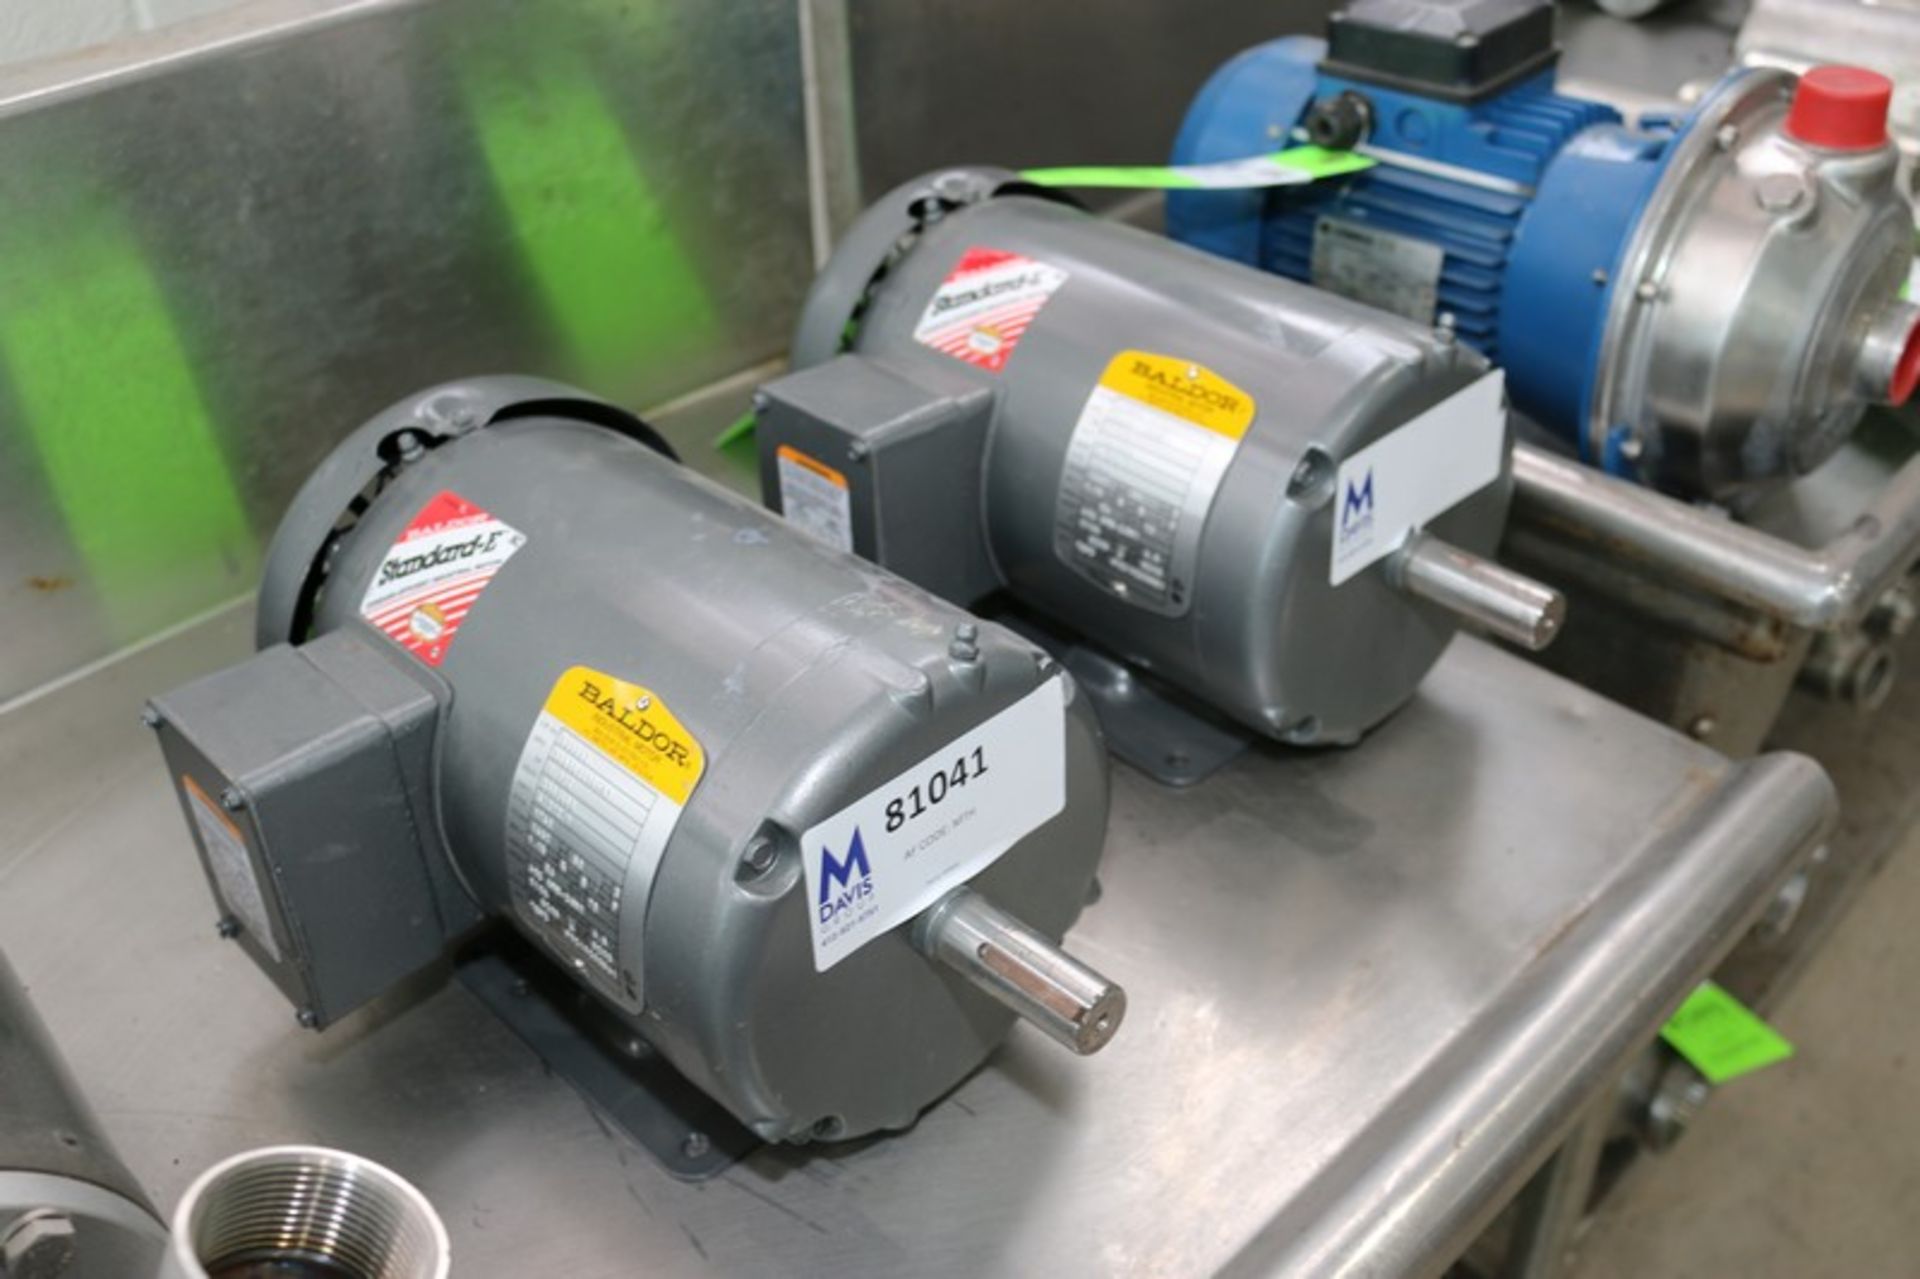 (2) NEW Baldor 1-1/2 hp Motors, 230/460 Volts, 3 Phase, 1740 RPM (INV#81041)(Located @ the MDG